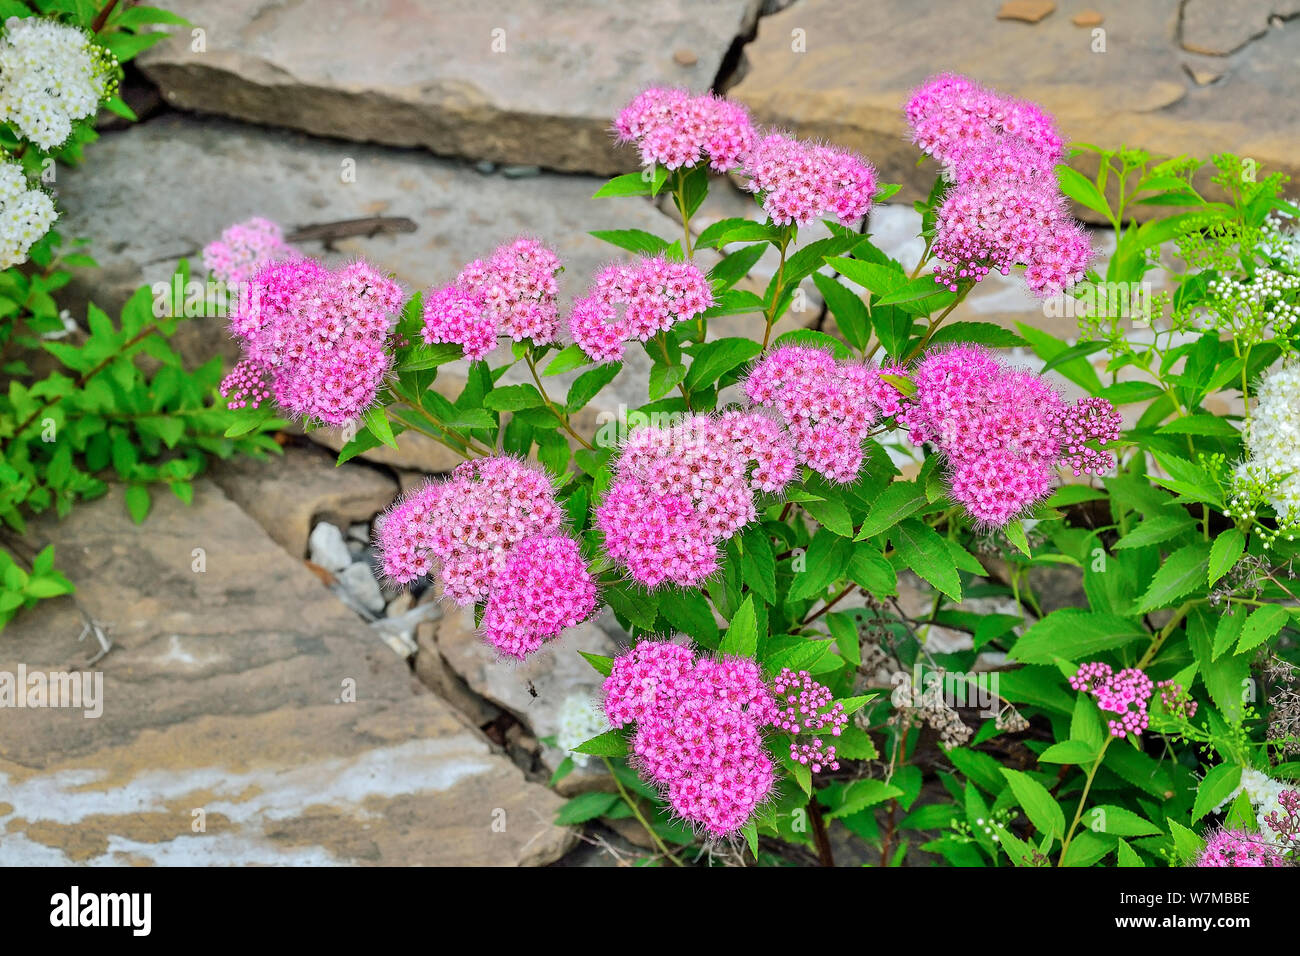 Japanese spirea (Spiraea japonica) bushes with delicate pink and white  flowers in stone gargen close up. Gardening, floriculture, landscaping, landsc Stock Photo